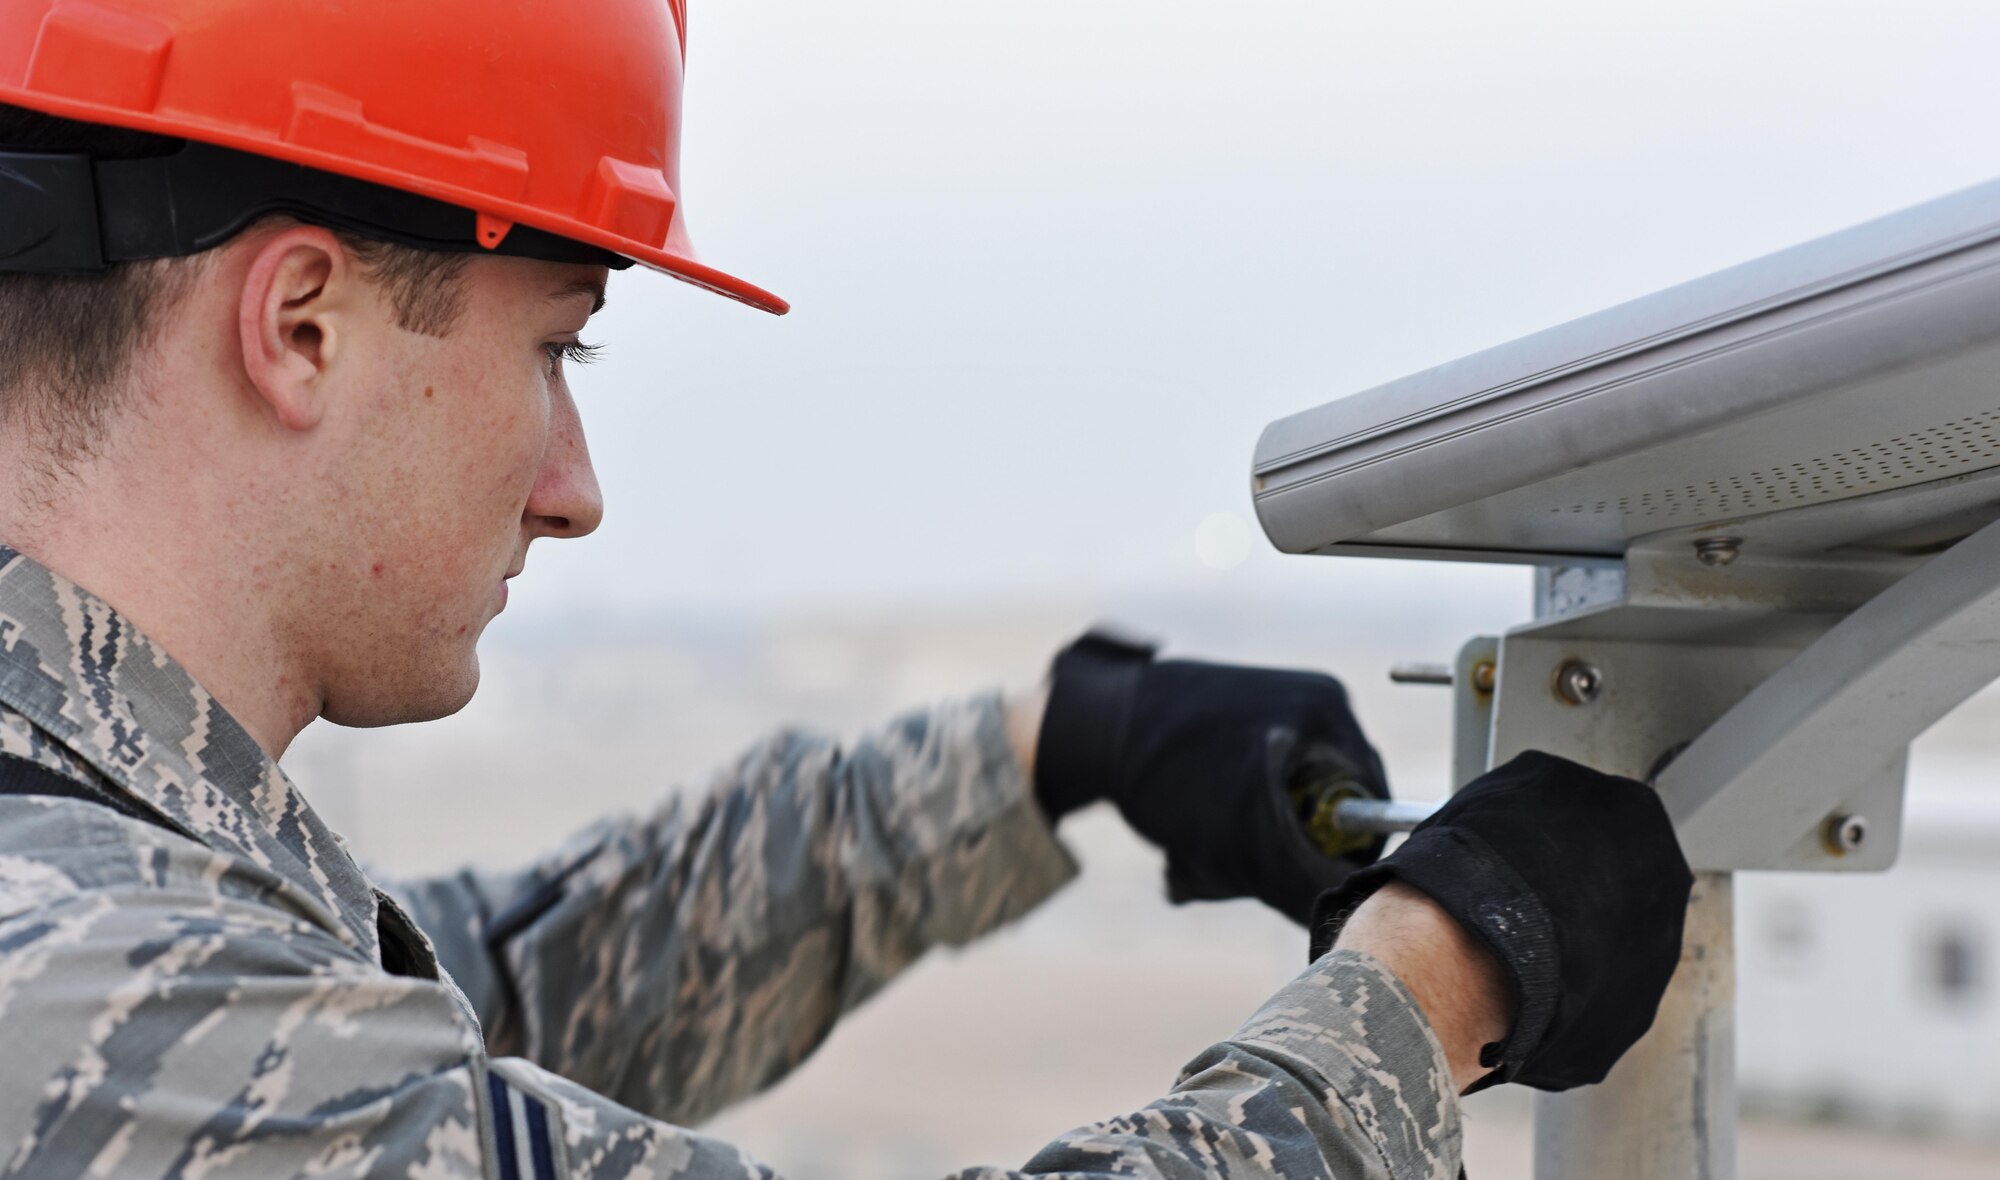 U.S. Air Force Airman 1st Class Corey Martin, an electrical systems apprentice with the 379th Expeditionary Civil Engineer Squadron, adjusts a light fixture at Al Udeid Air Base, Qatar, Feb. 22, 2017. Airmen with the 379th ECES Electrical Systems Section maintain 67 solar-powered low-emitting diode lights in Coalition Compound, the living area side of Al Udeid, in an effort to save on utility costs. (U.S. Air Force photo by Senior Airman Cynthia A. Innocenti)